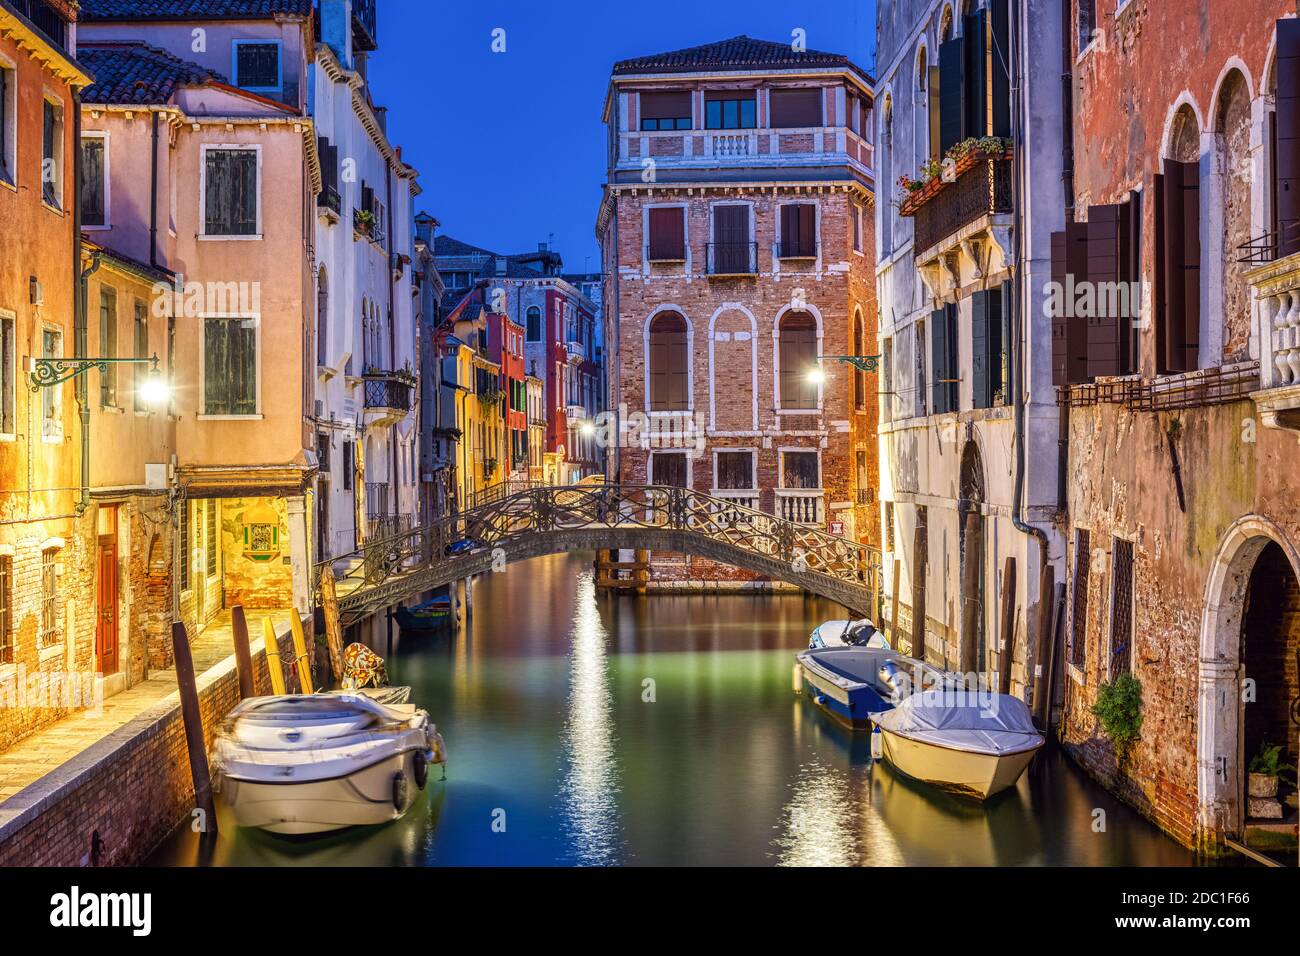 Lovely small canal in Venice at night Stock Photo